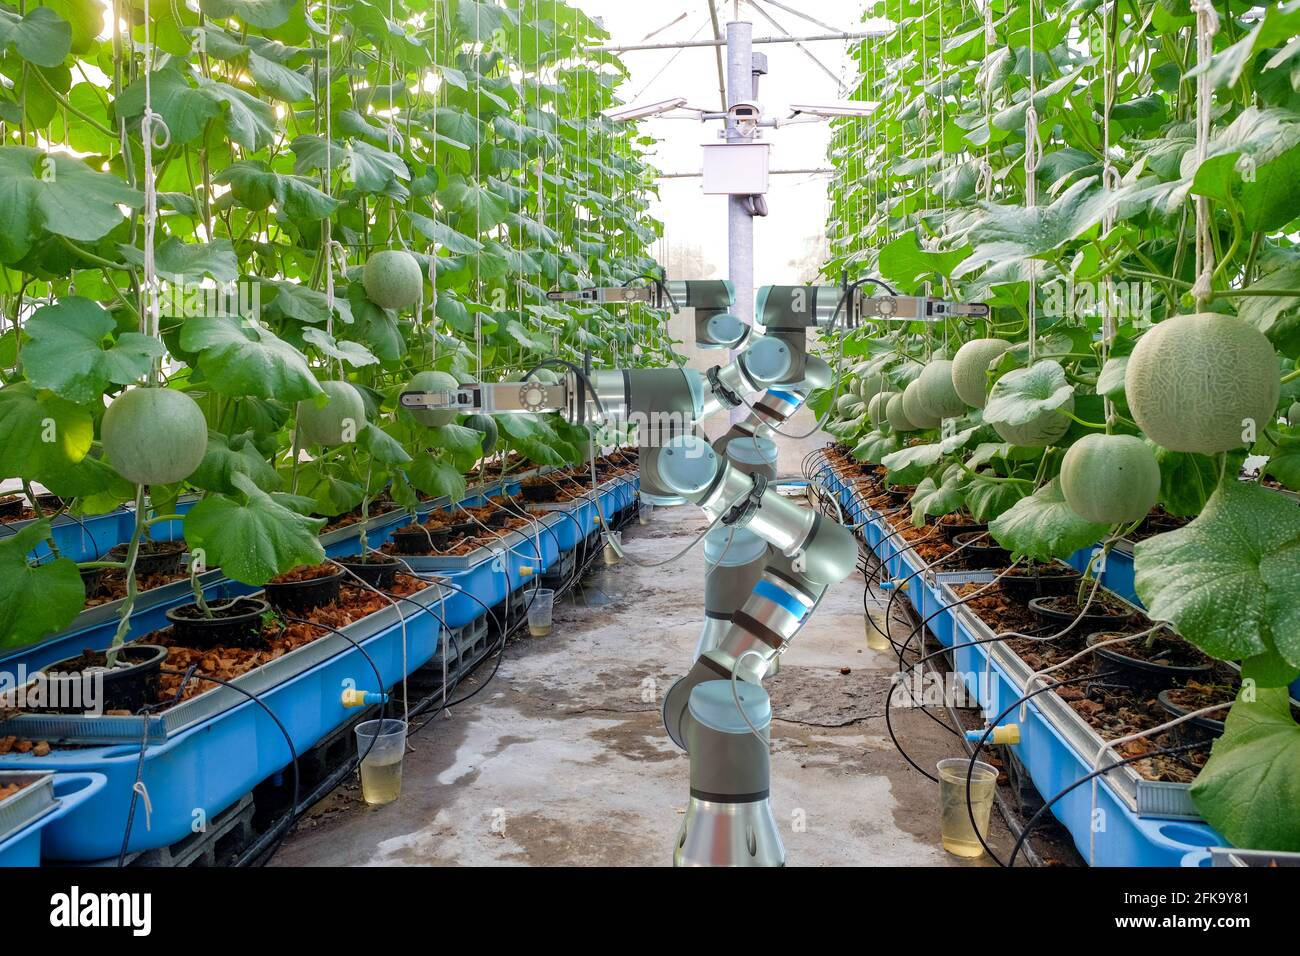 Smart robotic that installed an inside on melon greenhouse garden for assistant farmers harvest melon fruits and CCTV for record data, smart farm 4.0 Stock Photo